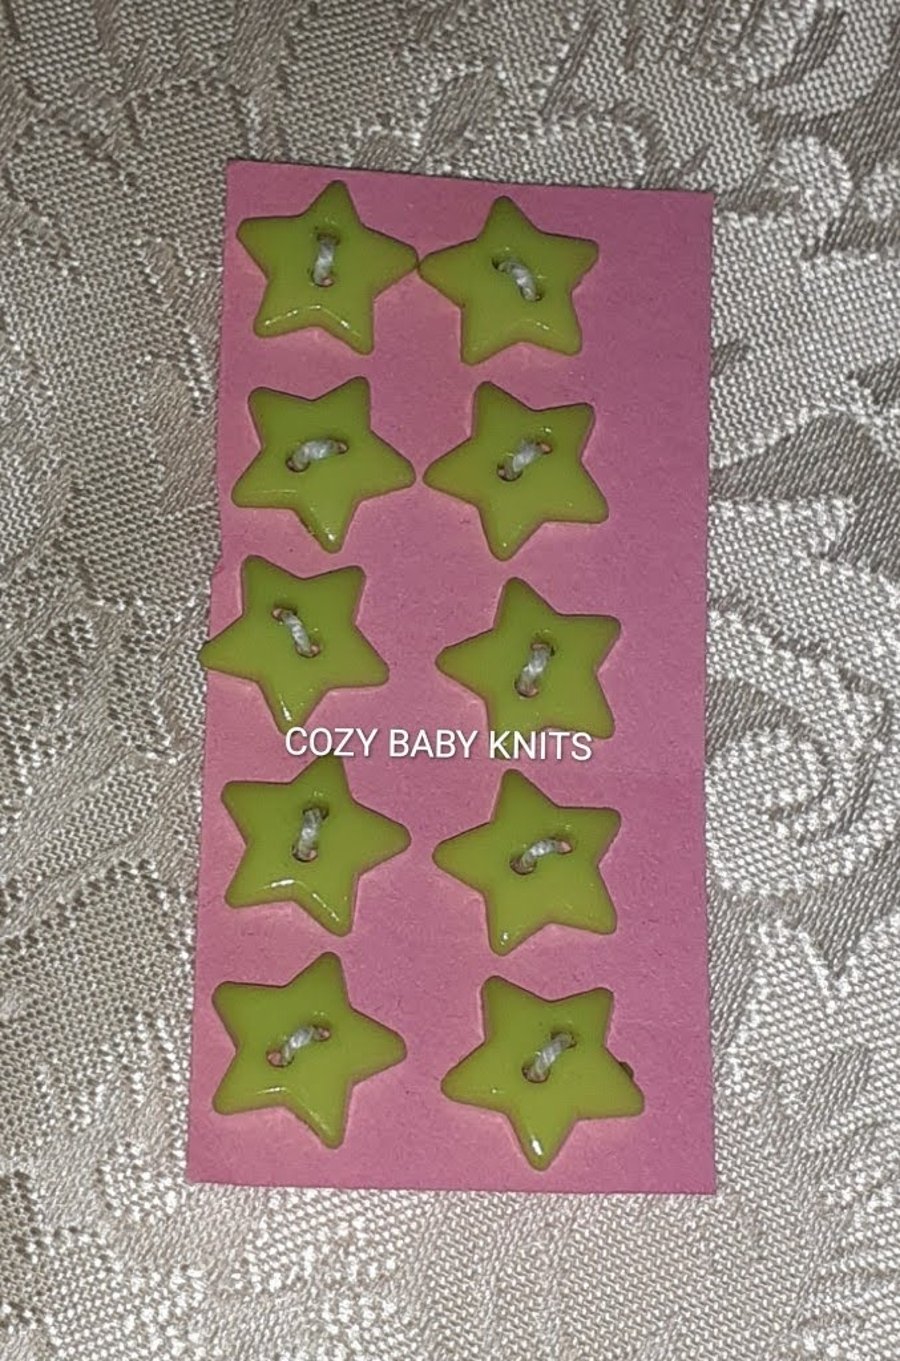 Pale green star plastic buttons